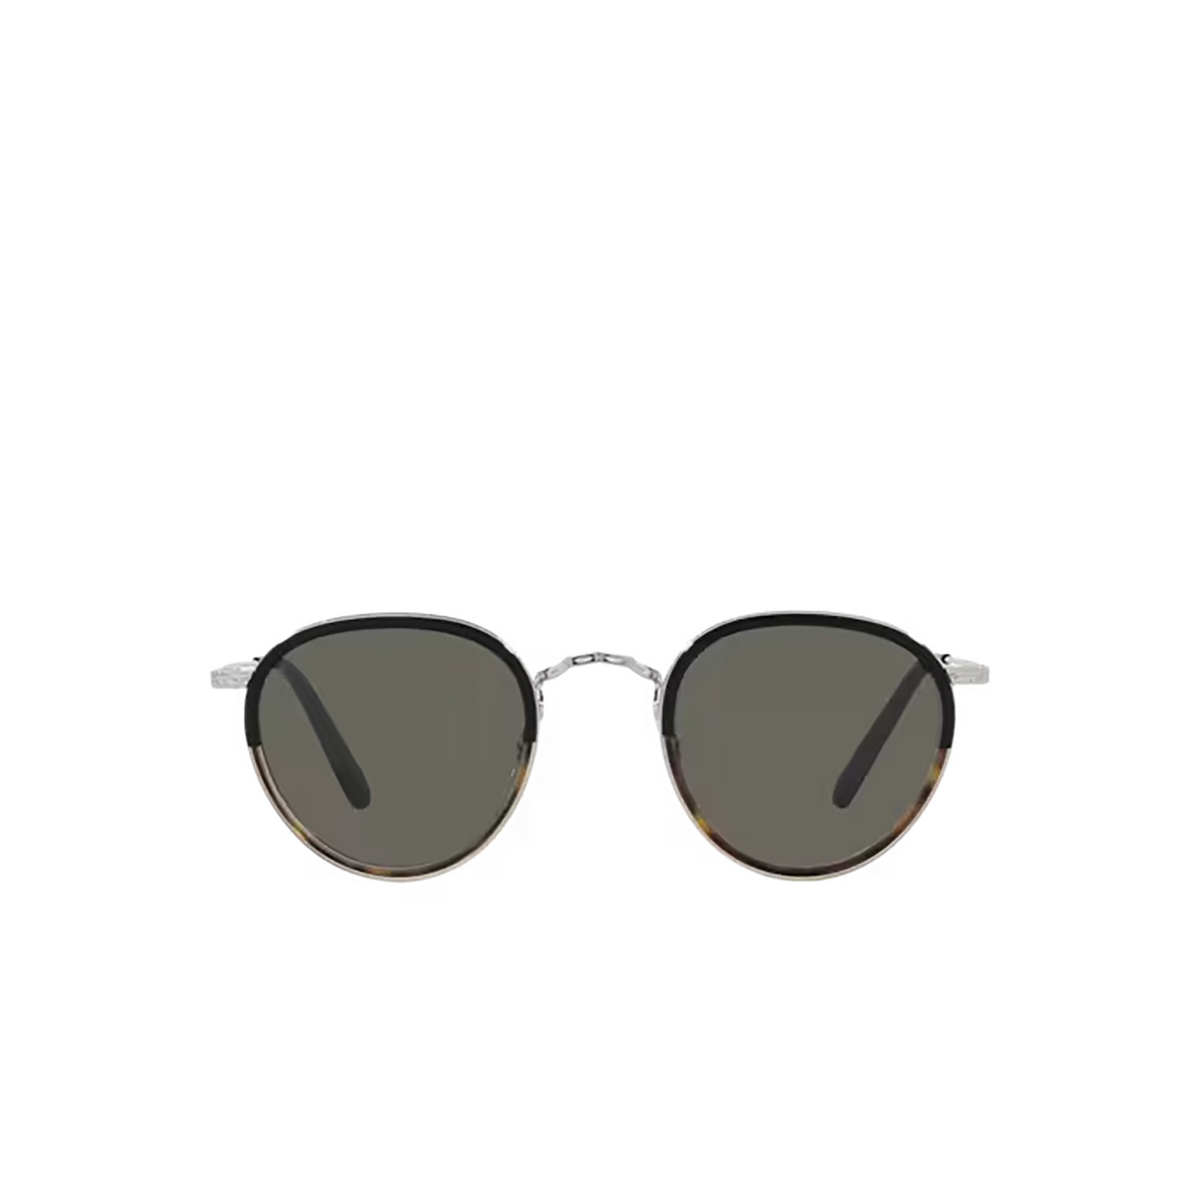 Oliver Peoples MP-2 Sunglasses 5036R5 Black / 362 Gradient / Silver - front view